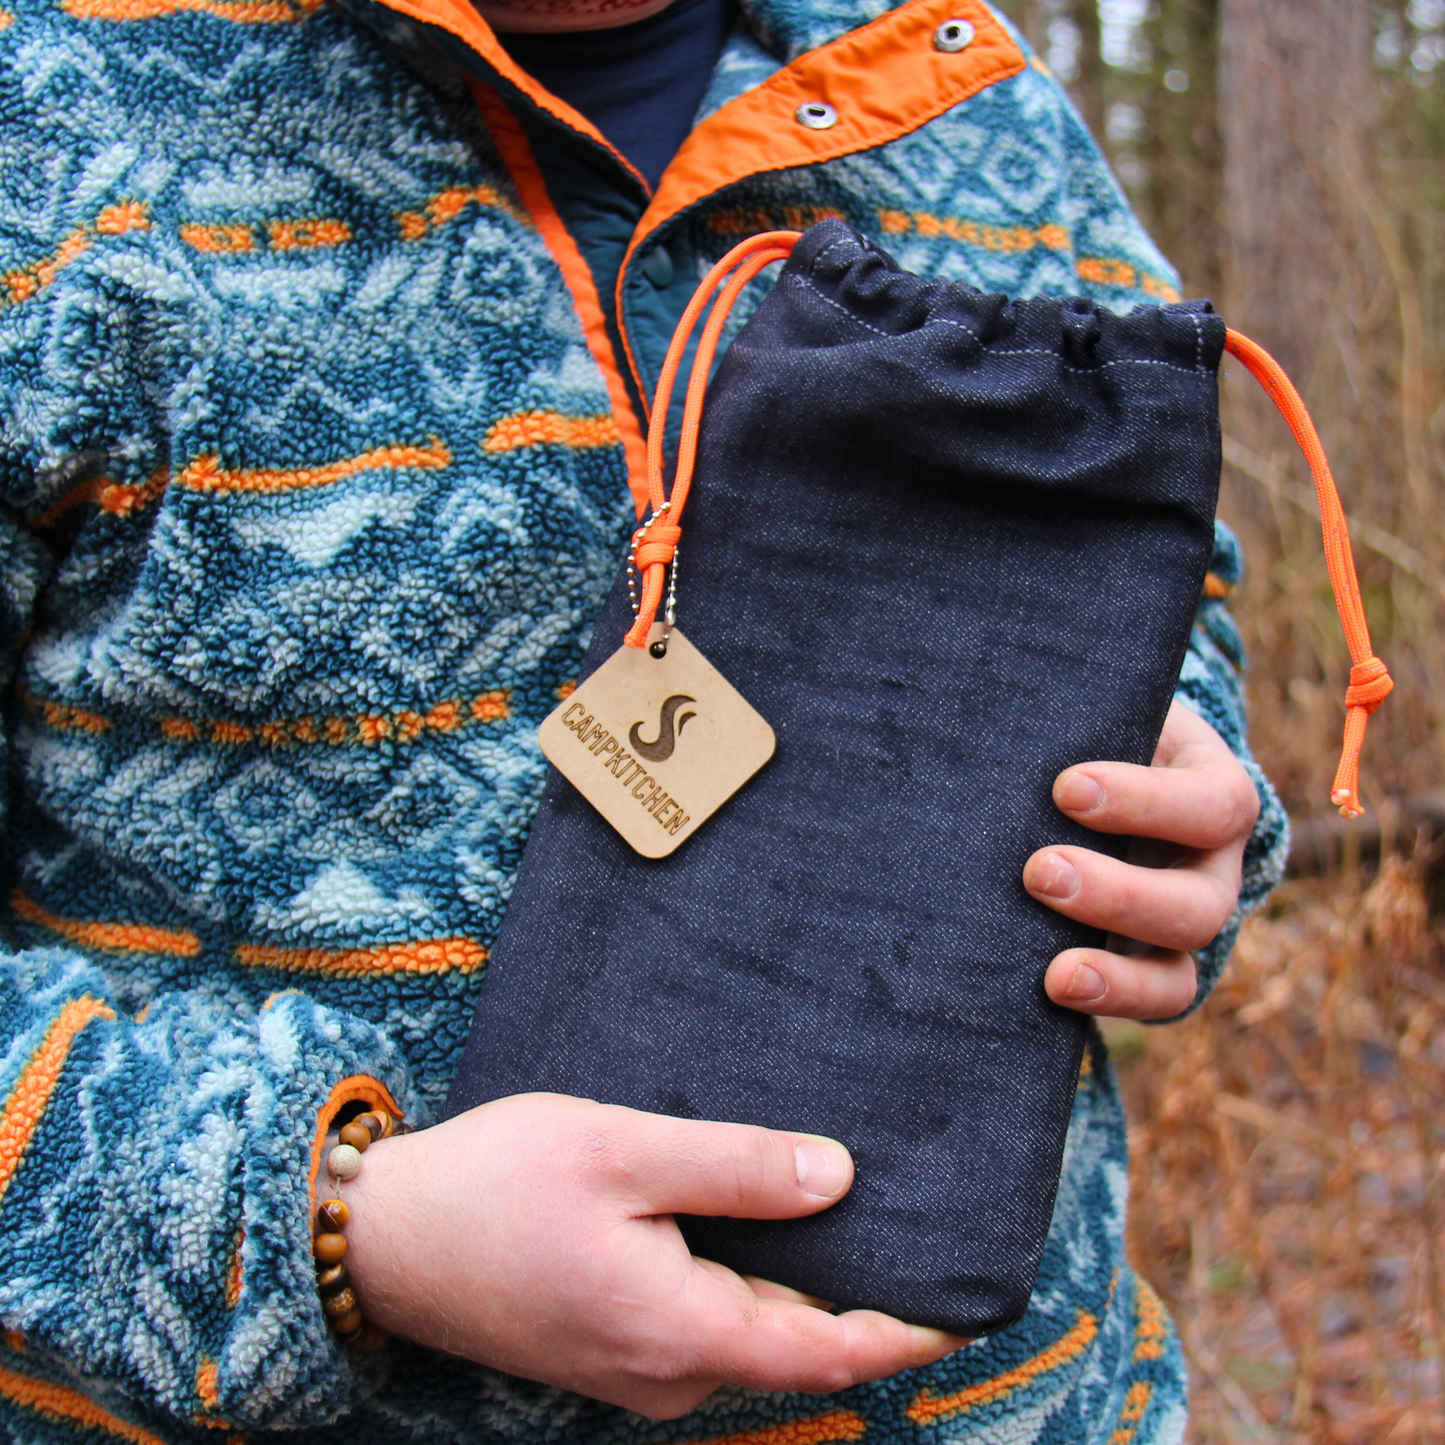 The CAMPKITCHEN Twig Stove denim bag. Hand stitched with paracord drawstring details.